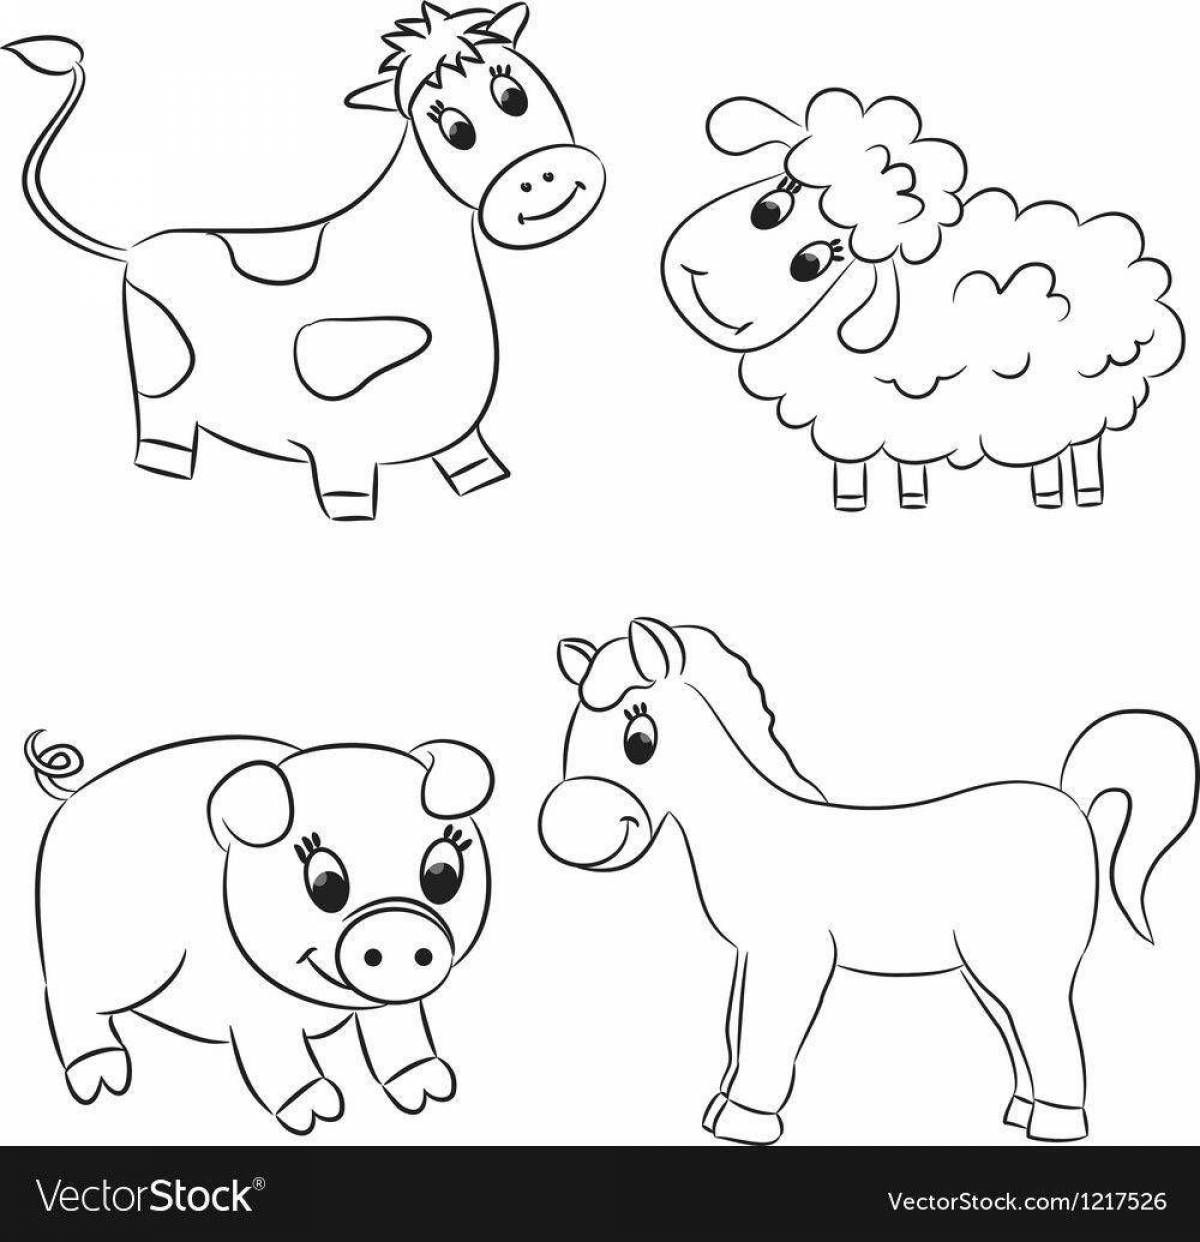 Fun coloring pages for pets